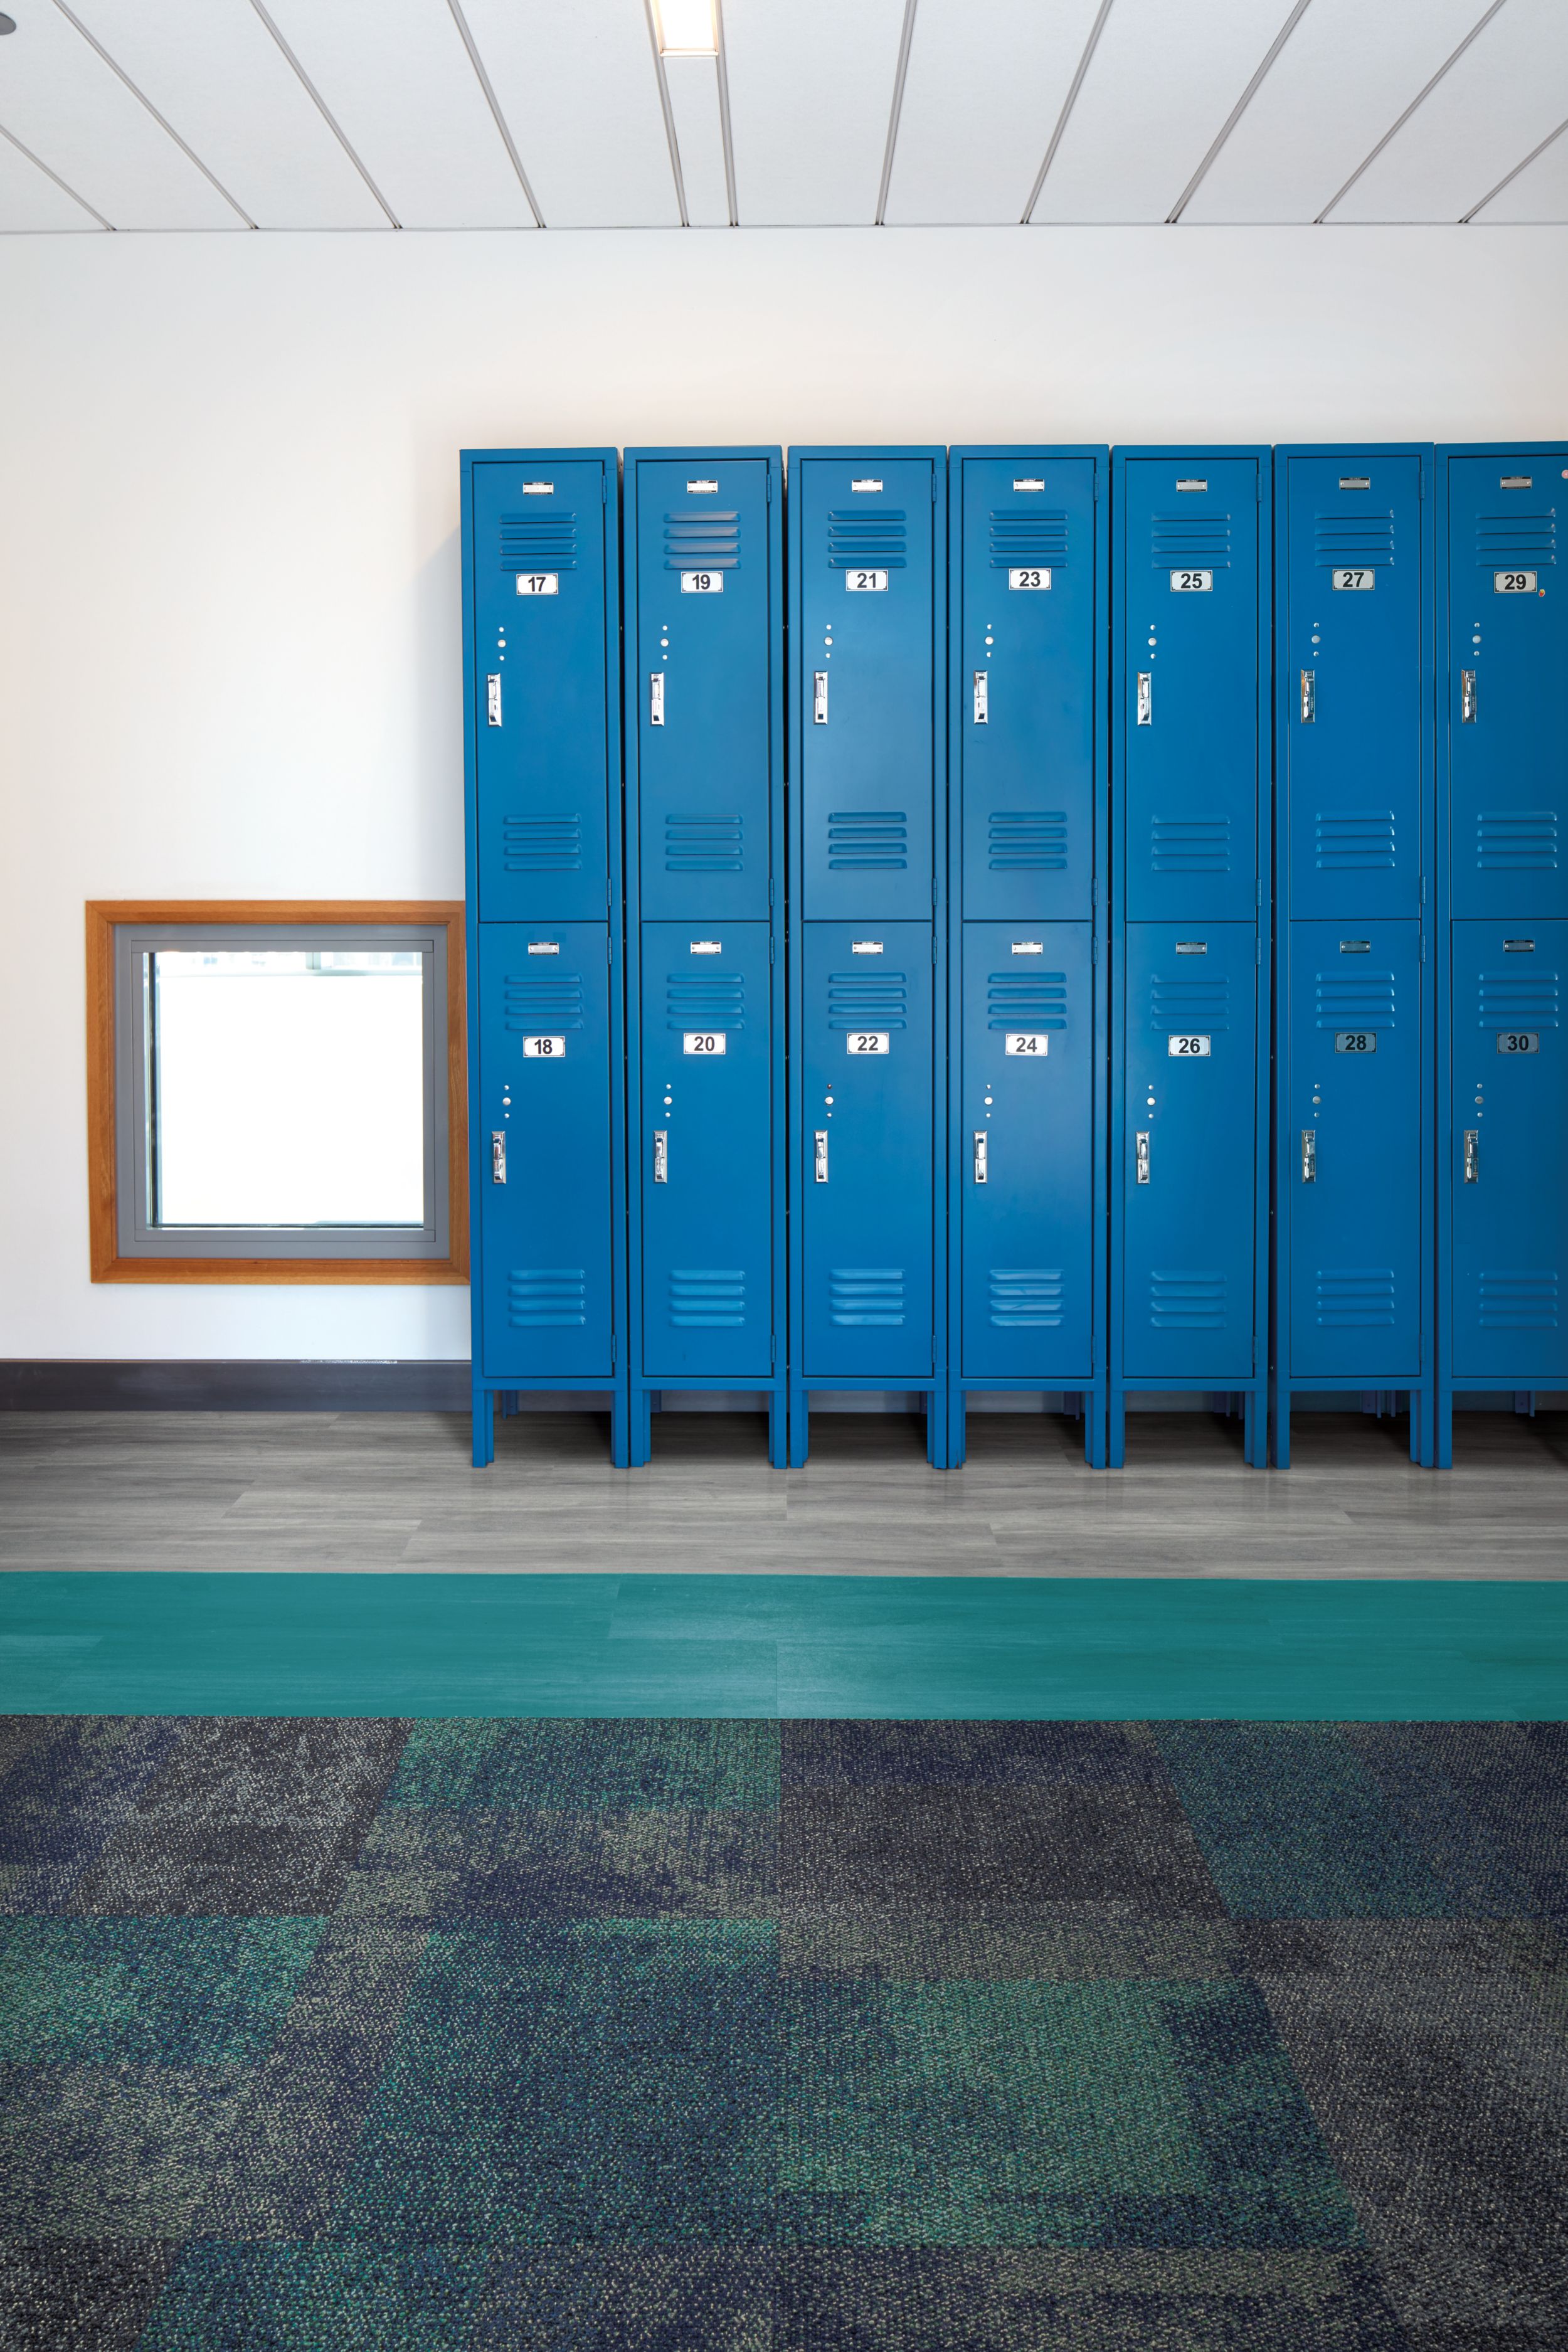 Interface Exposed carpet tile and Studio Set LVT in hallway with blue lockers image number 11